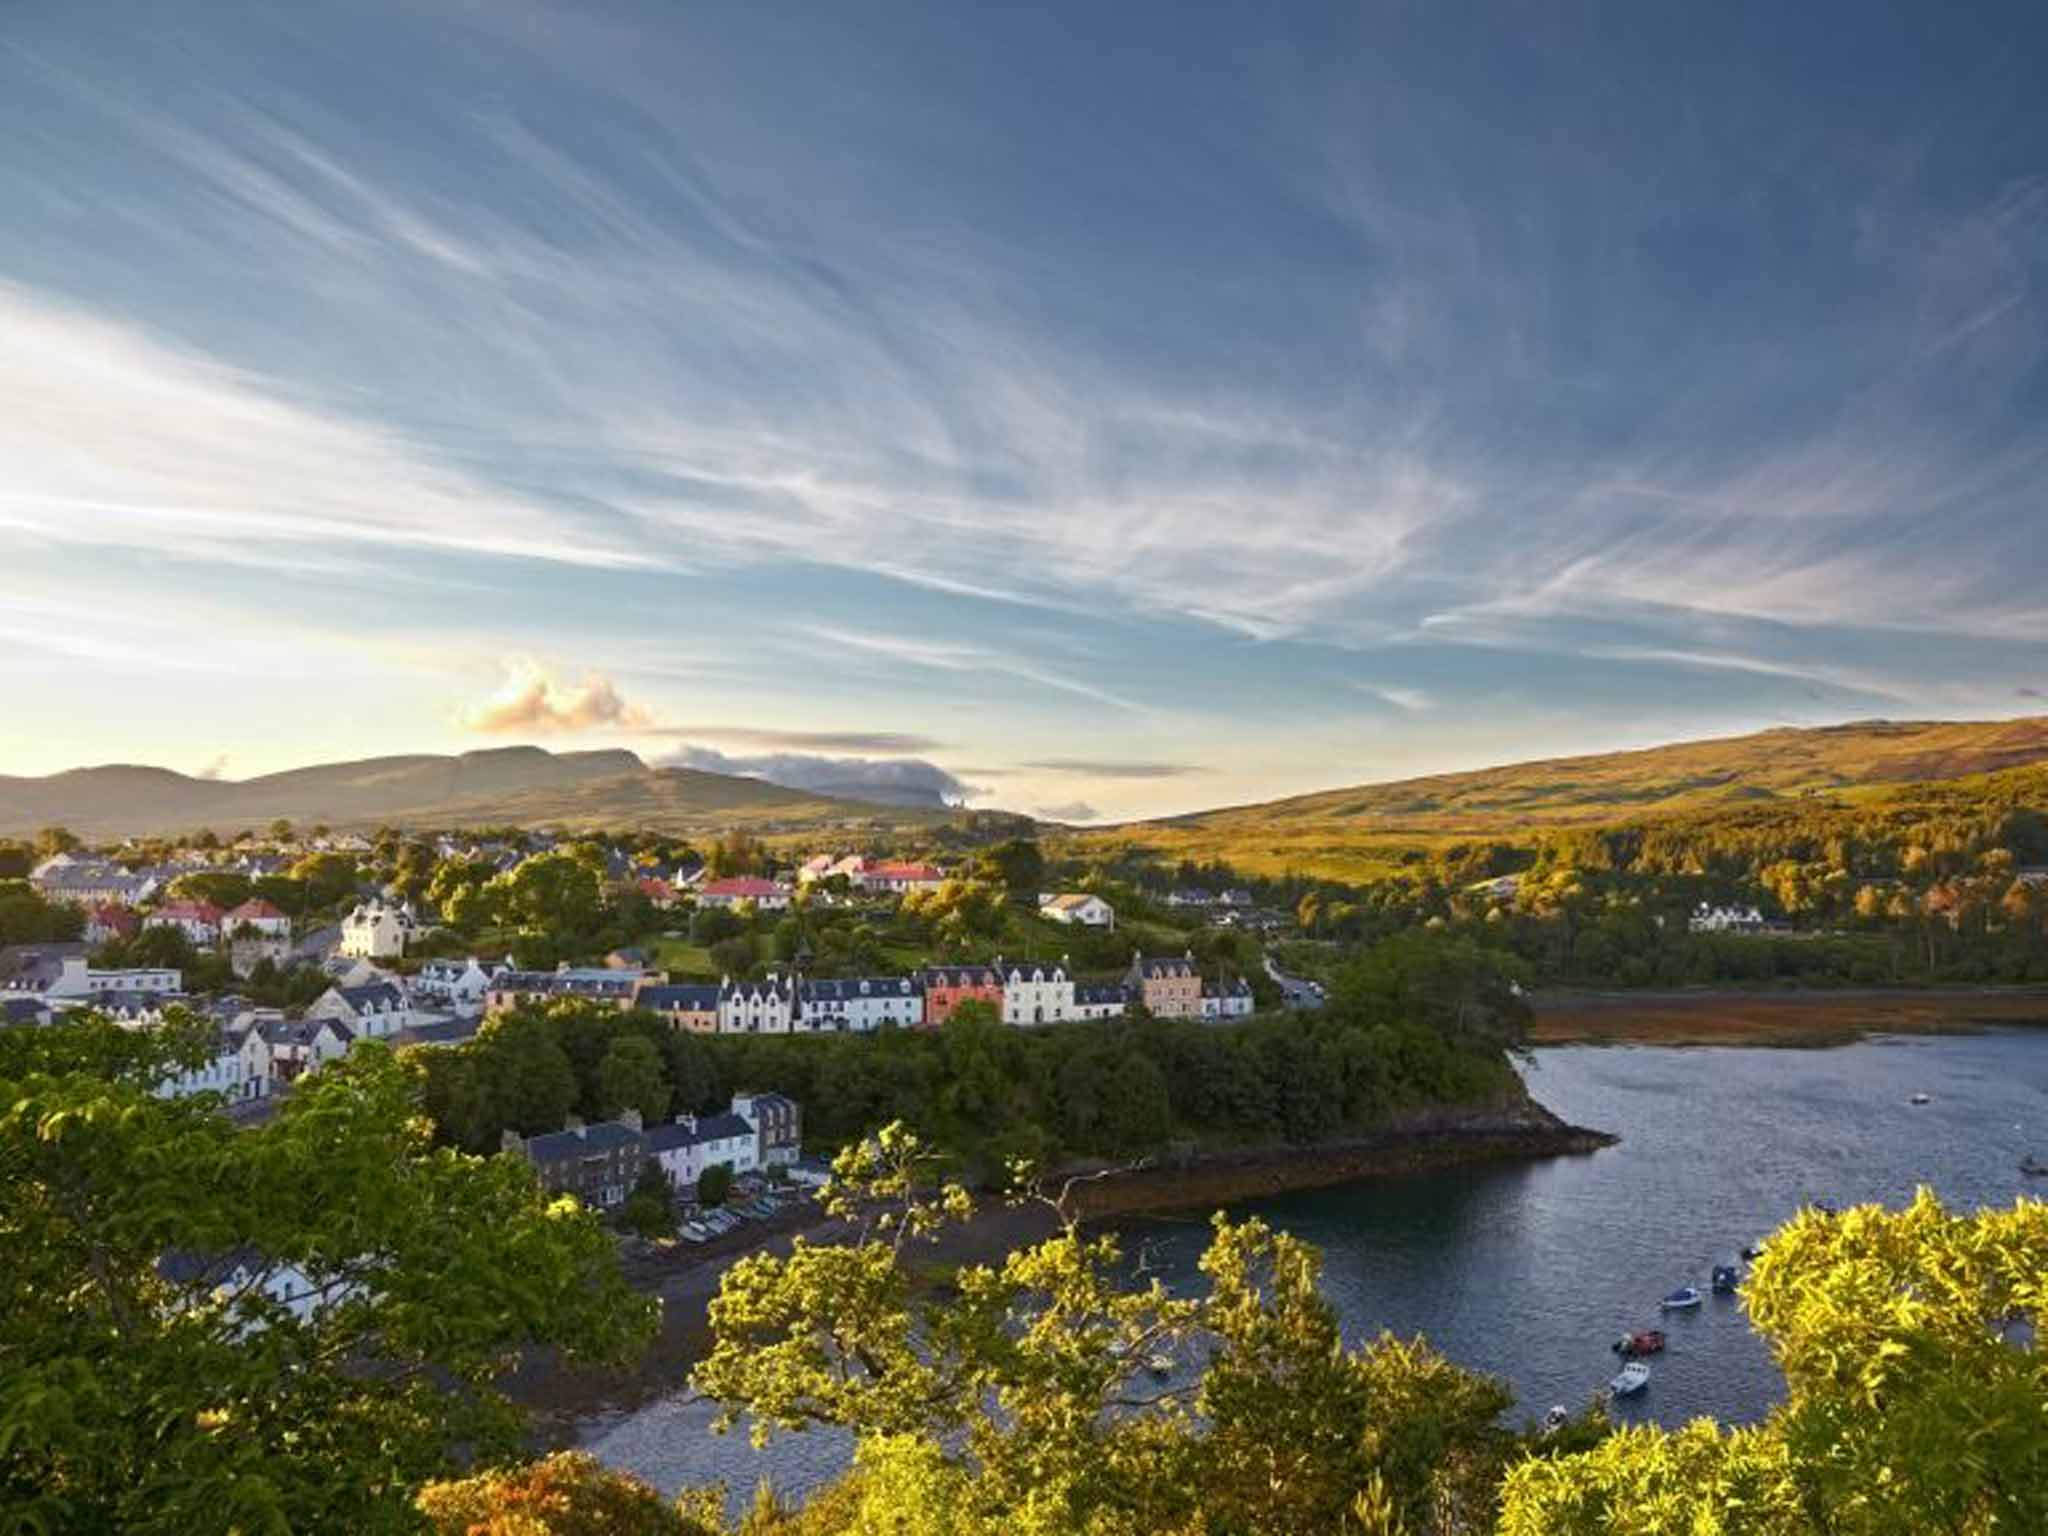 Portree, the main town on the isle of Skye, gets a new Youth Hostel from next month